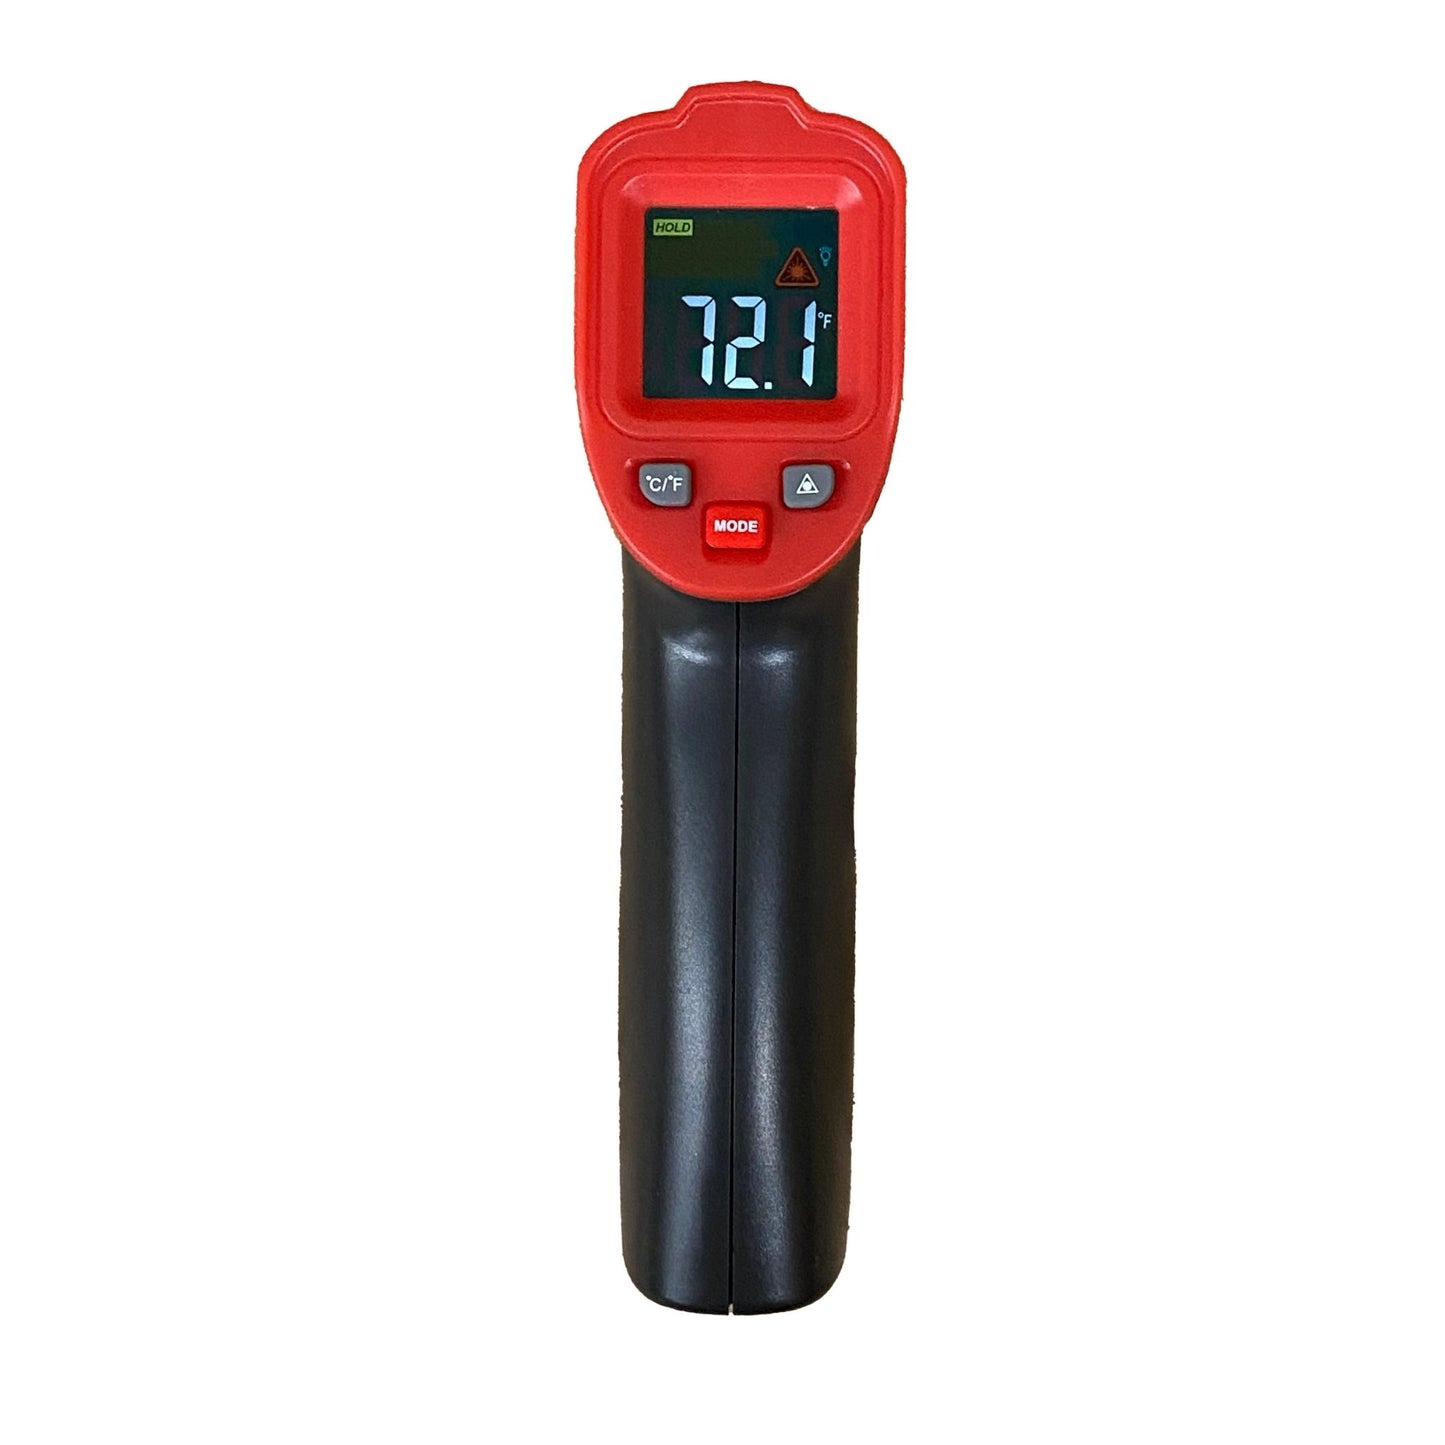 High Temp Infrared Thermometer for Wood-Fired Ovens – WPPO LLC Direct